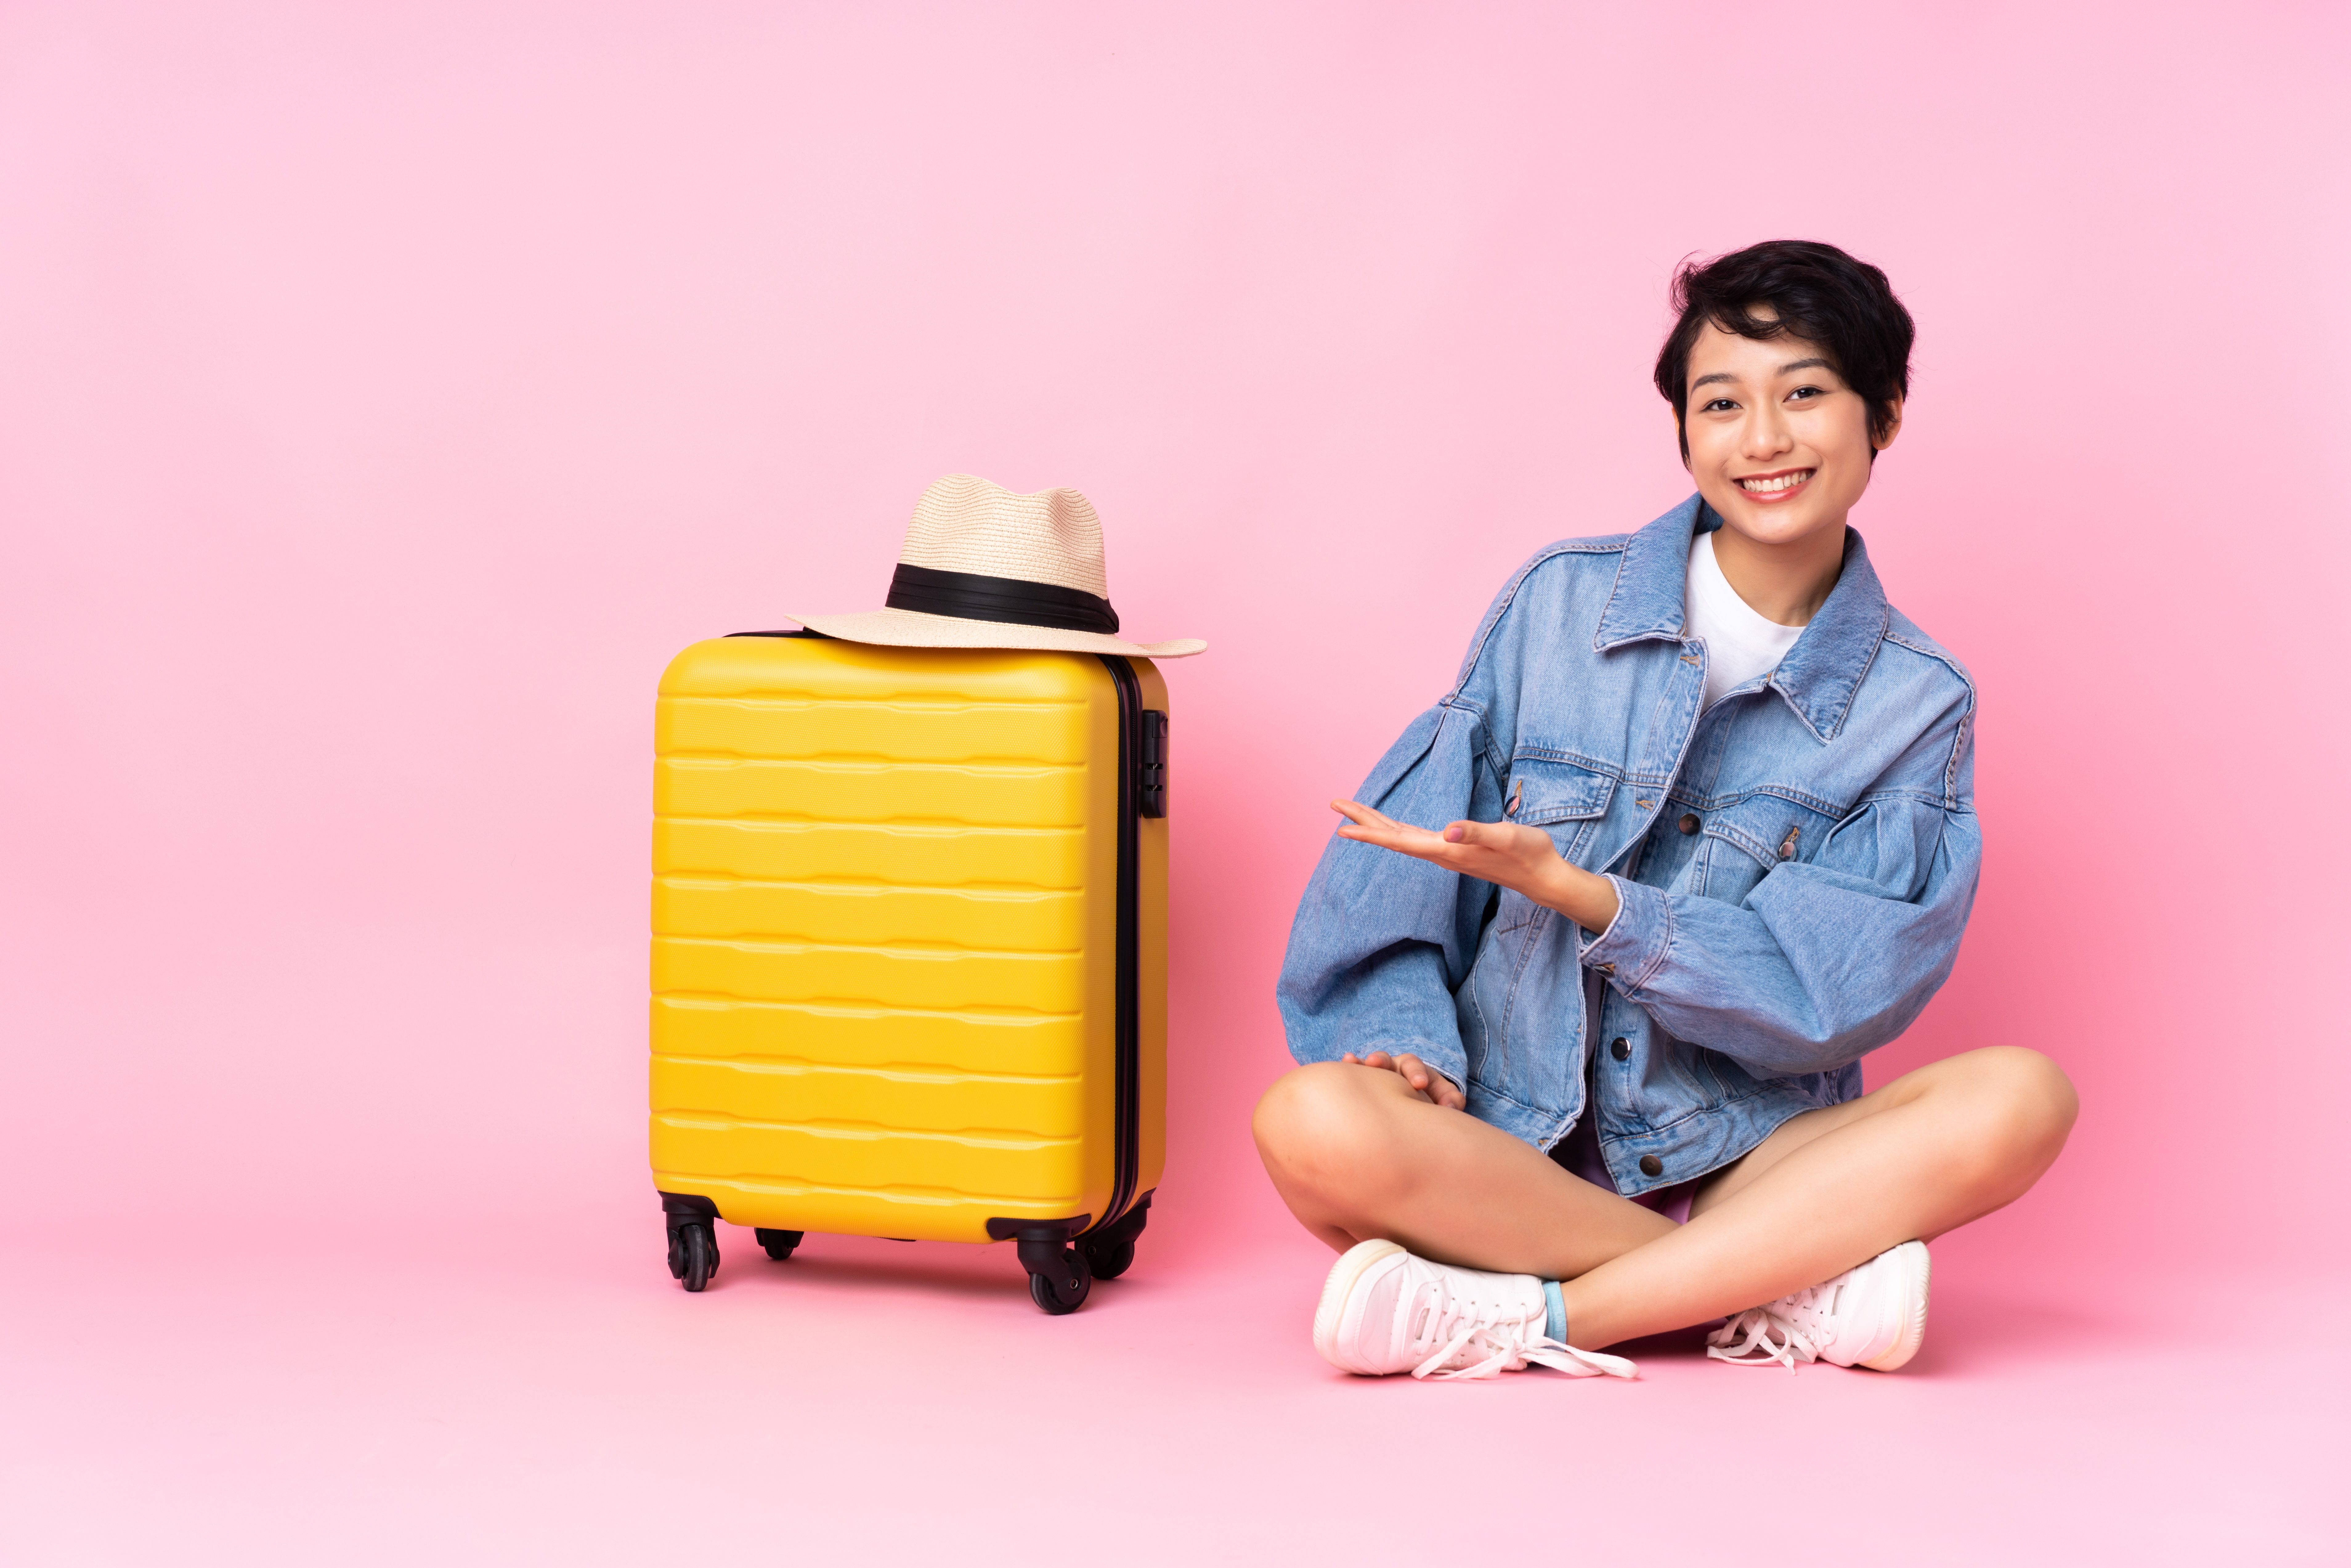 Young traveler Vietnamese woman with suitcase sitting on the floor over isolated pink background presenting an idea while looking smiling towards